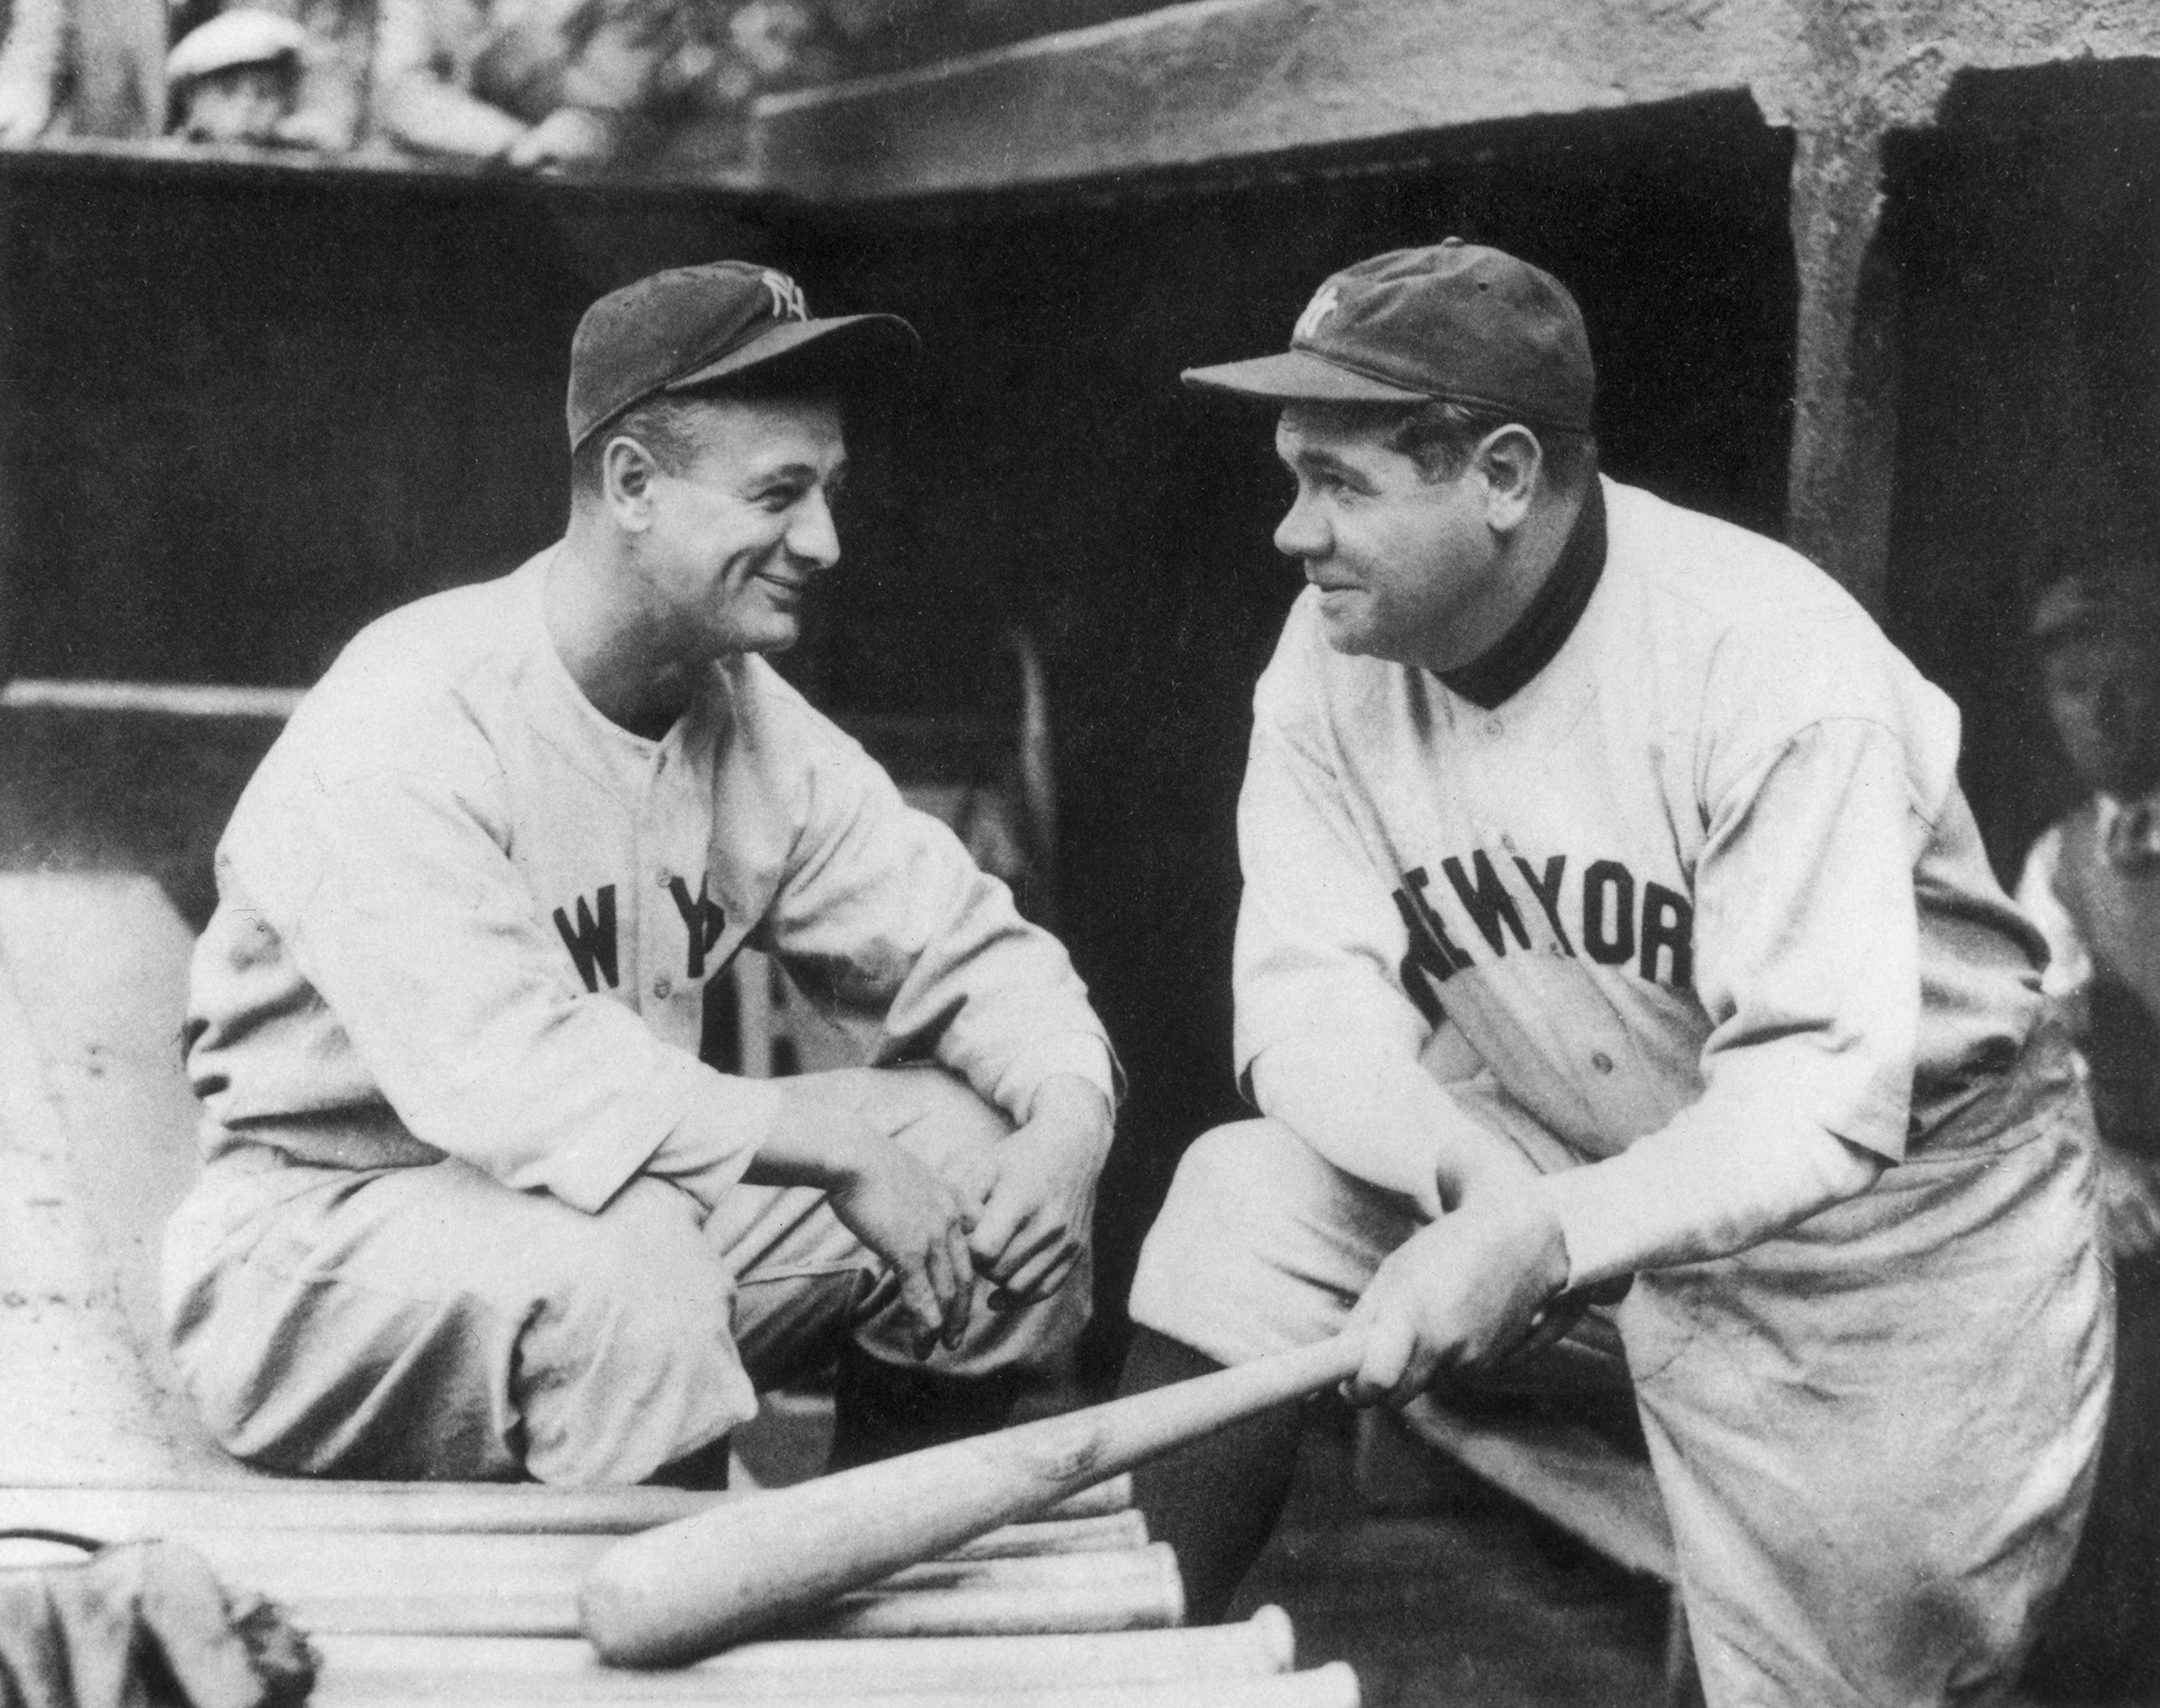 Black and white photo of Lou Gehrig, left, talking with Babe Ruth, right, in a baseball dugout